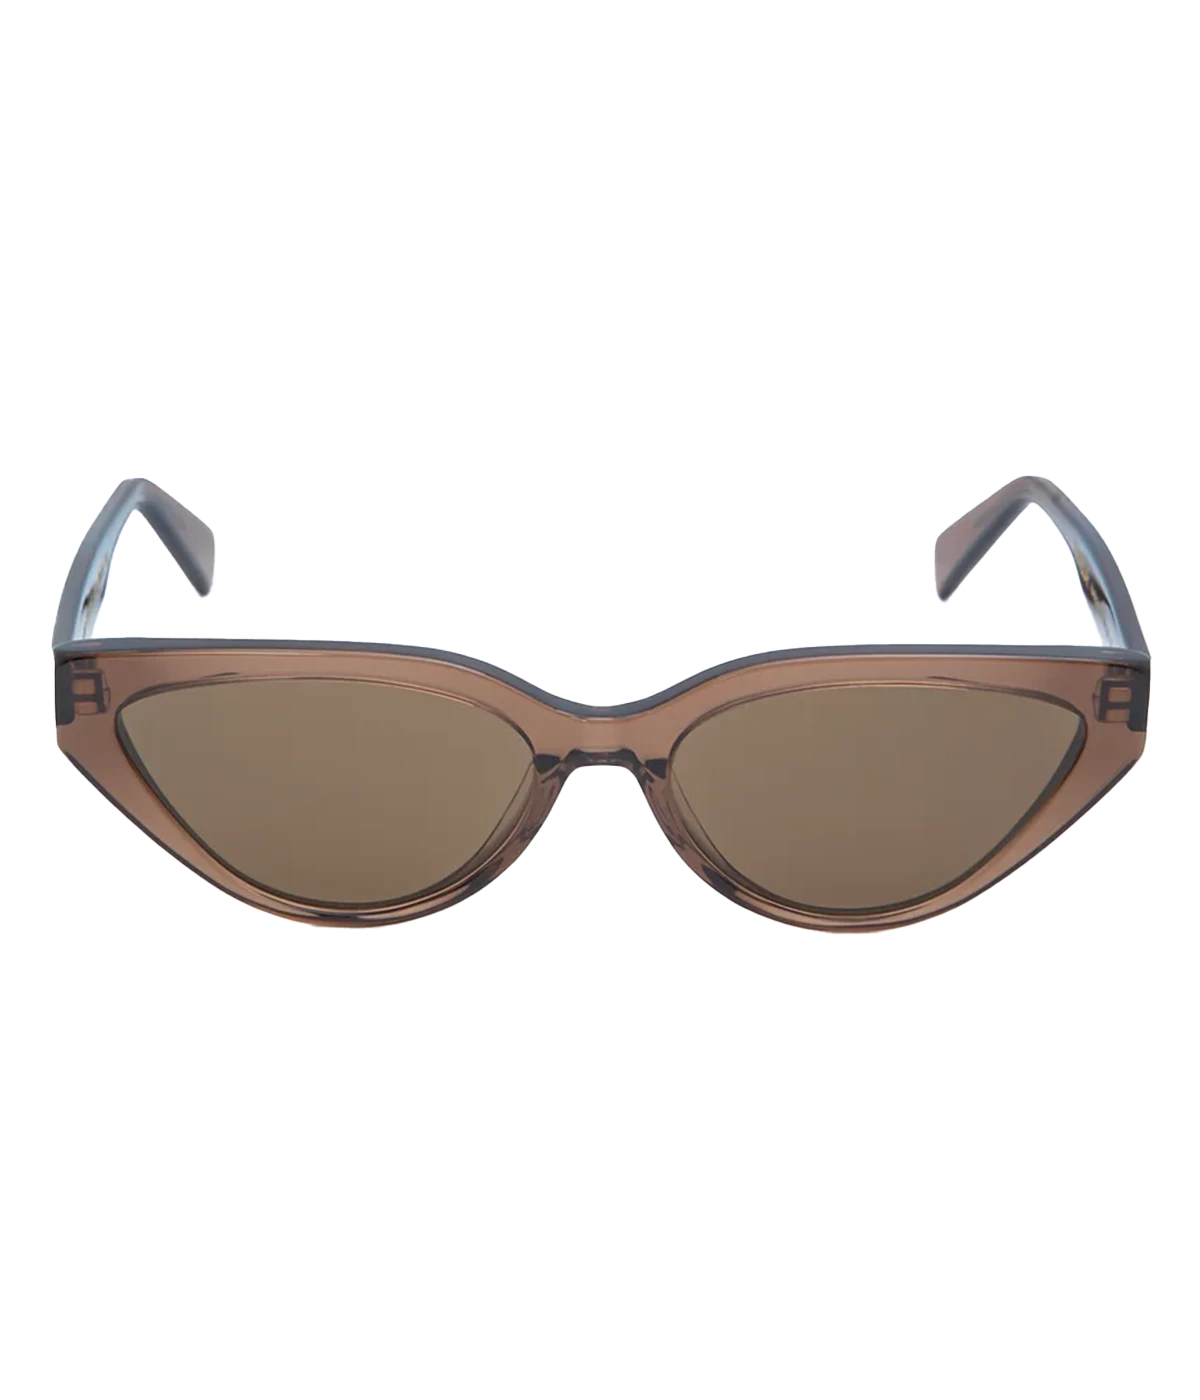 Brown cateye sunglasses by Viveur. Made in Italy.